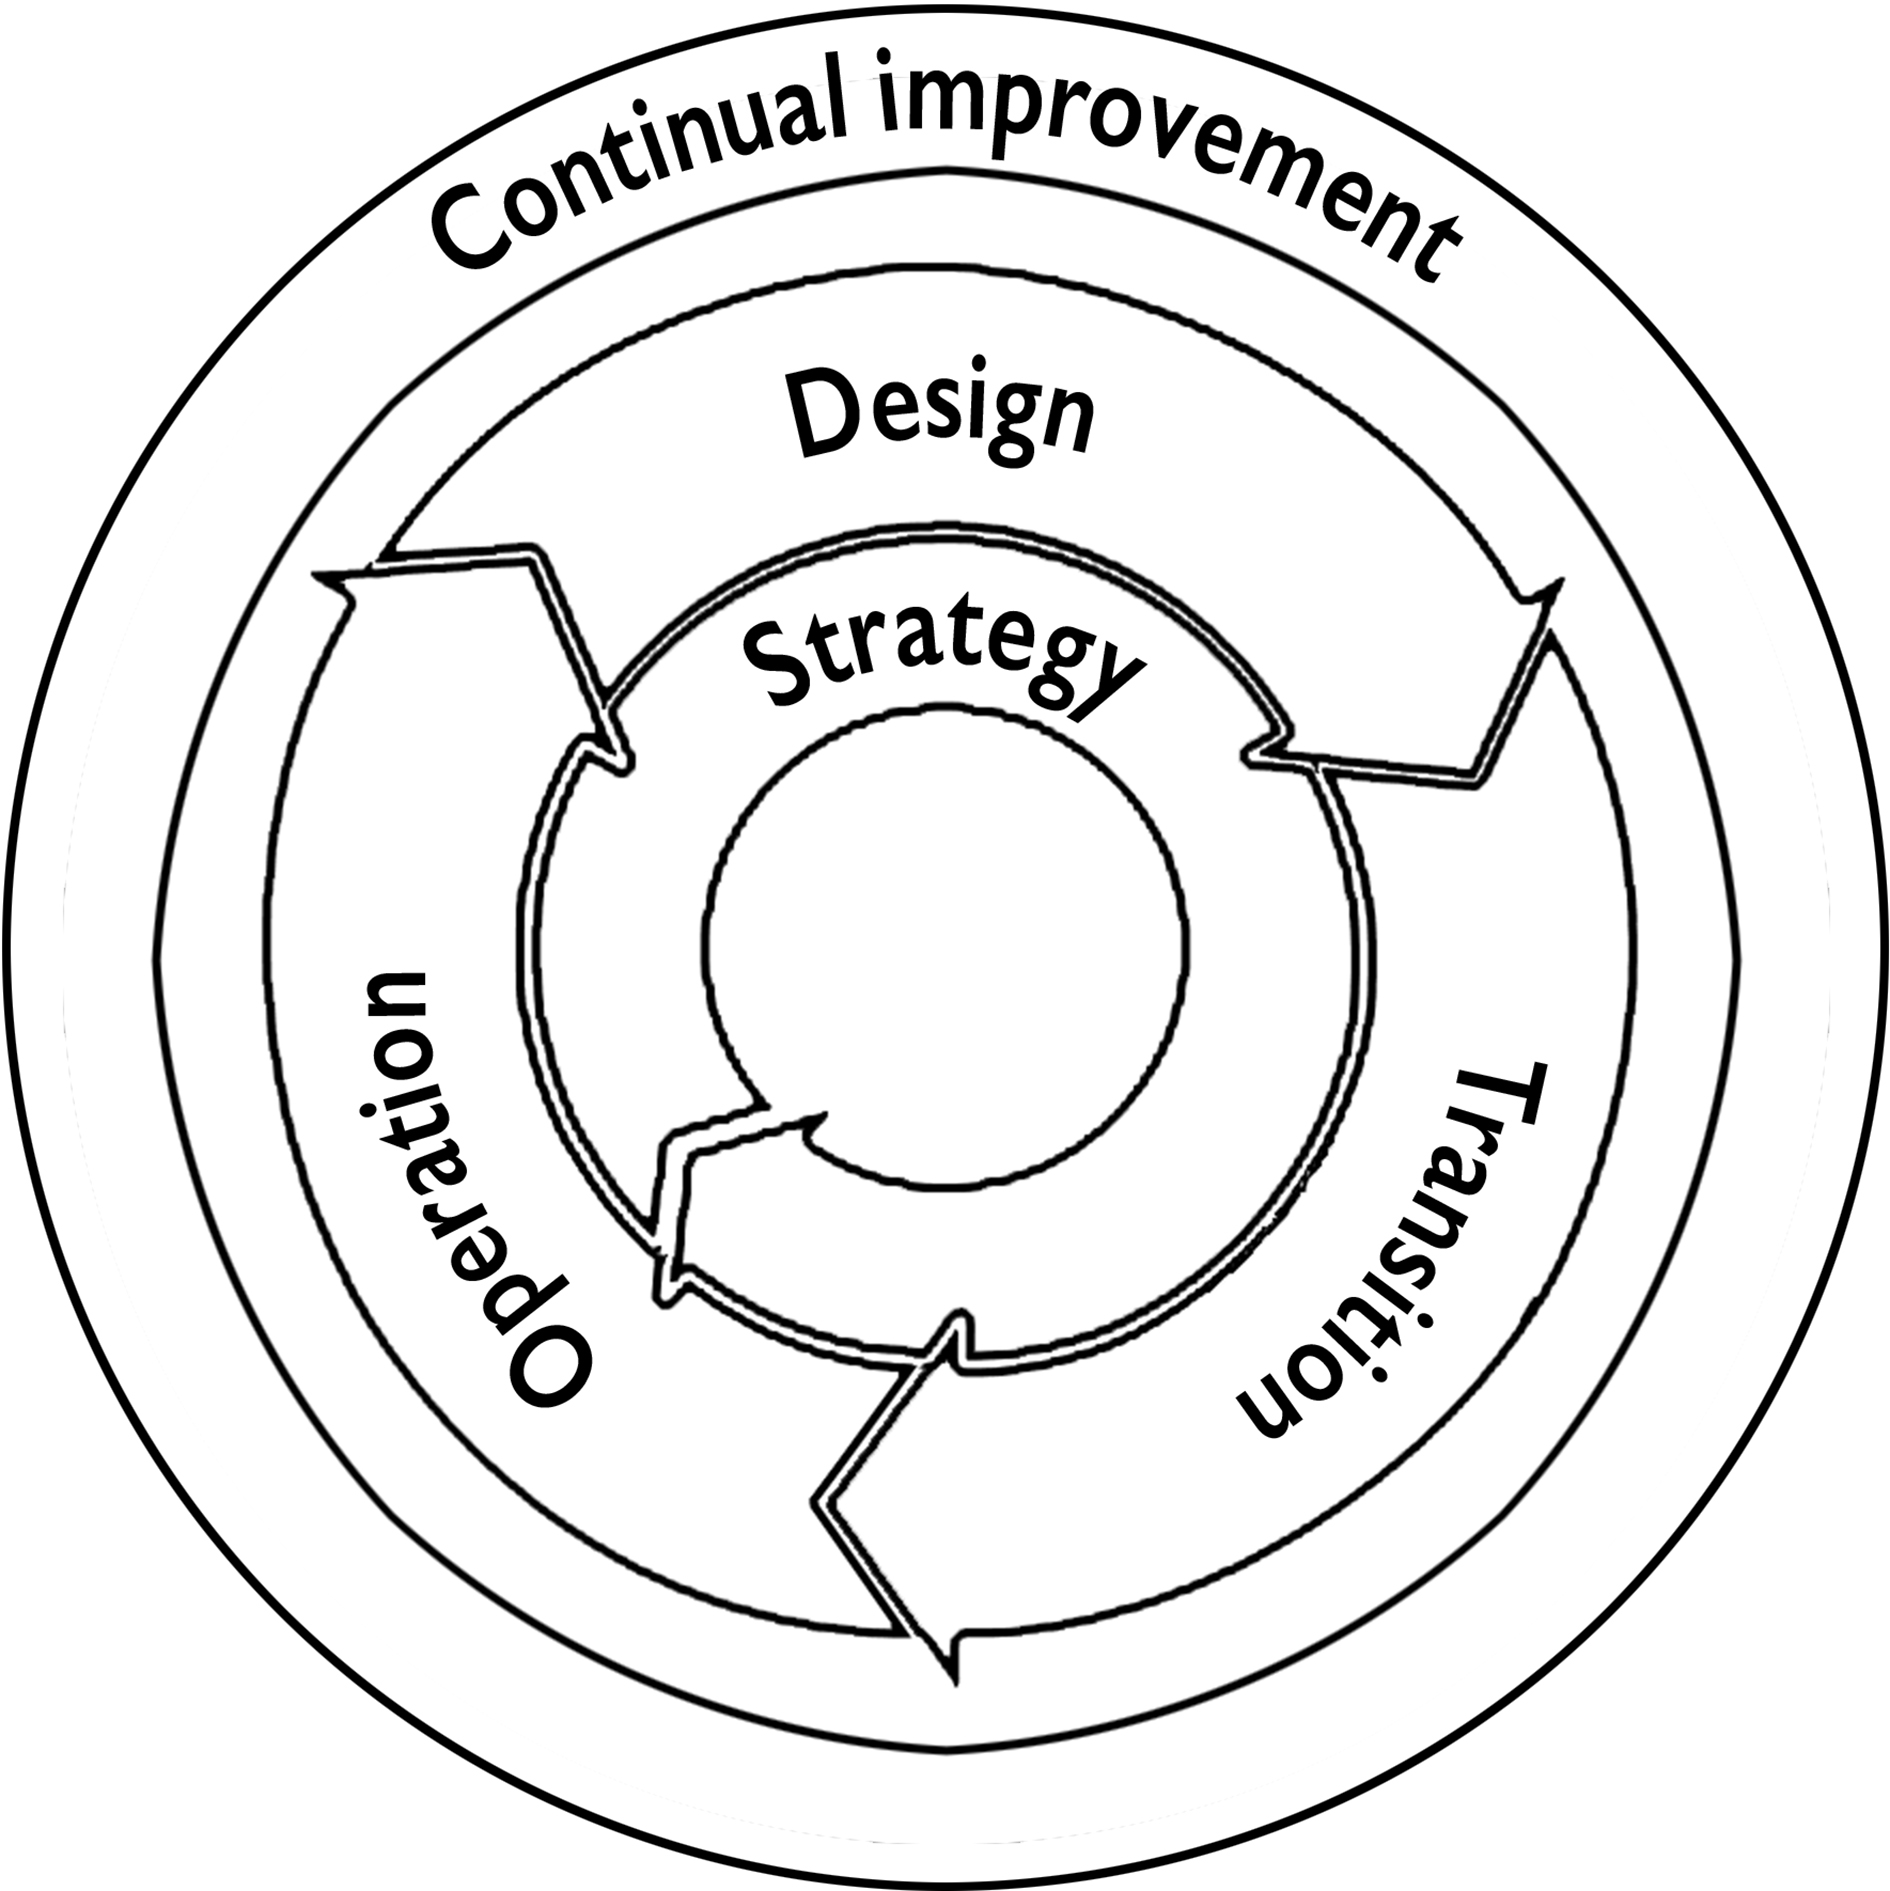 The ITIL service lifecycle (adopted from Taylor, 2007).